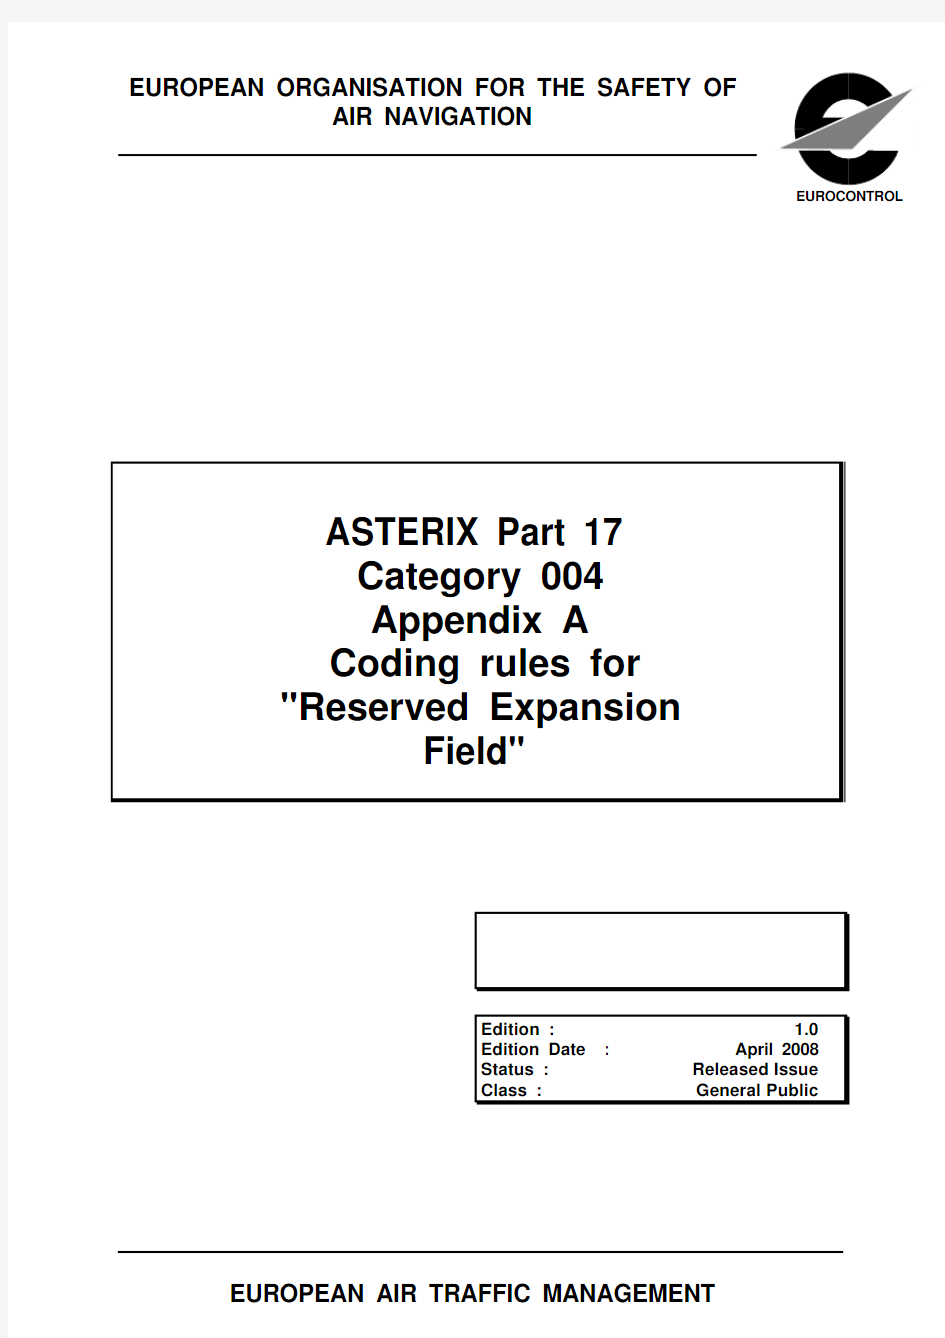 cat004-asterix-coding-rules-for-reserved-expansion-field-part-17-appendix-a